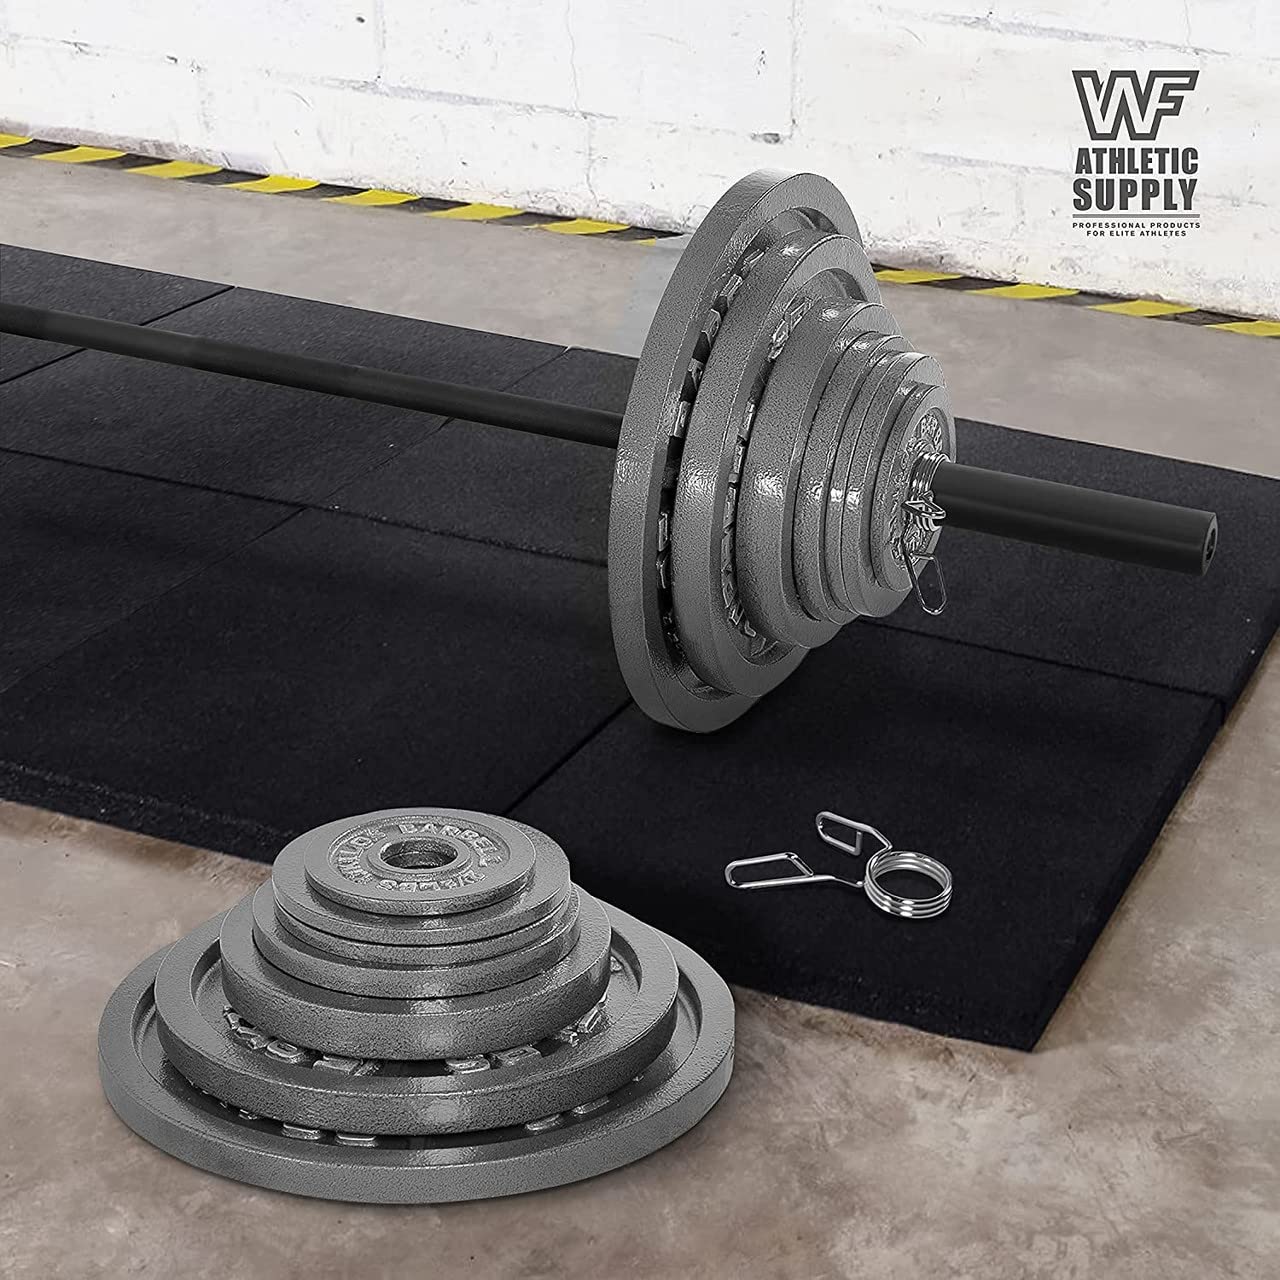 WF Athletic Supply 290lb & 300lb & 555lb Traditional/Classic Olympic Weight Plates Set with 7 ft. Olympic Barbell, Great for Strength Training, Weightlifting, Bodybuilding & Powerlifting